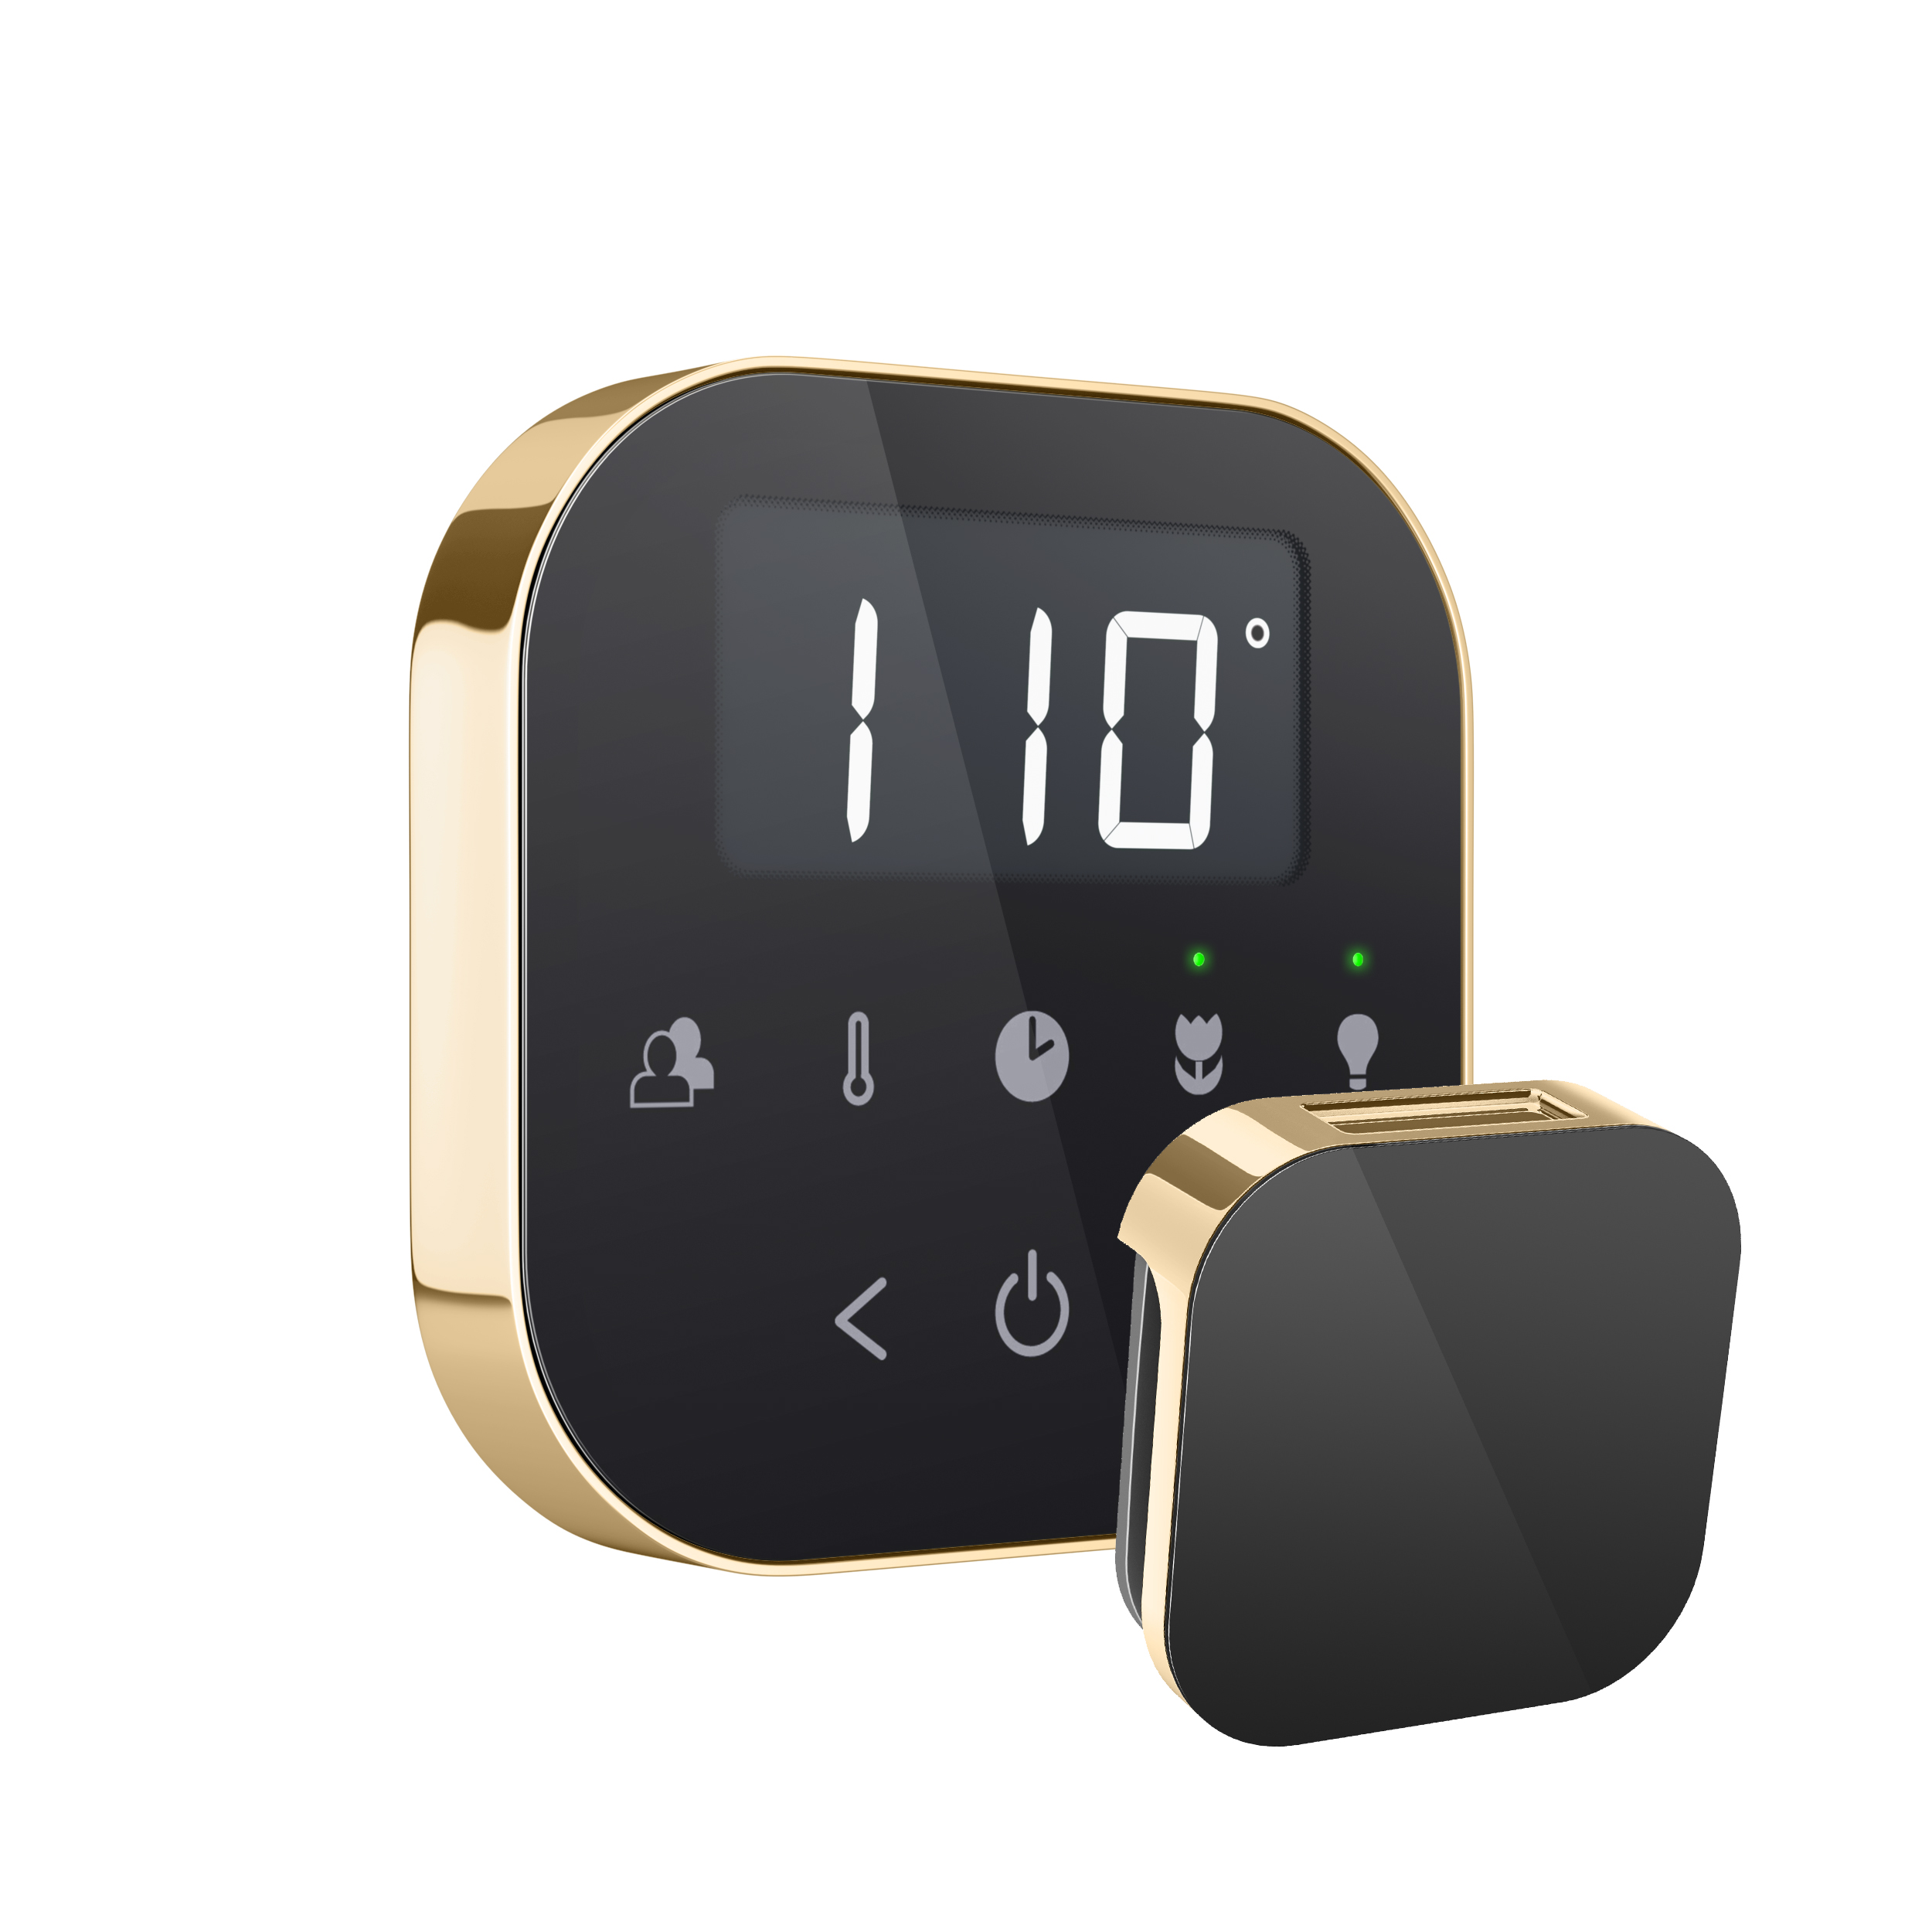 Mr Steam AIRTBK-PB AirTempo Steam Shower Control in Black with Polished Brass